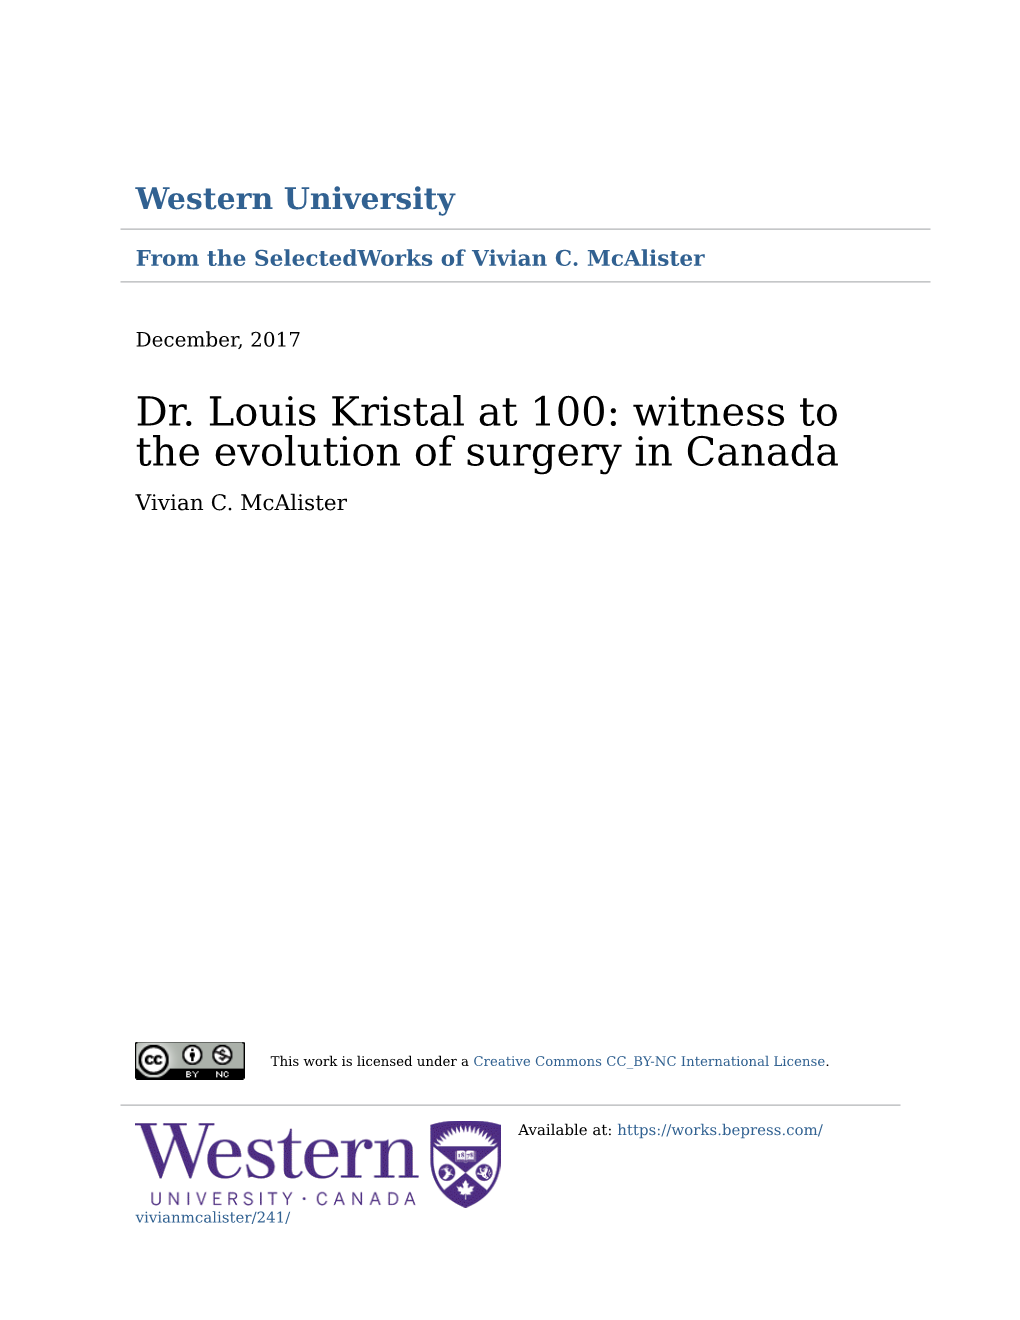 Dr. Louis Kristal at 100: Witness to the Evolution of Surgery in Canada Vivian C